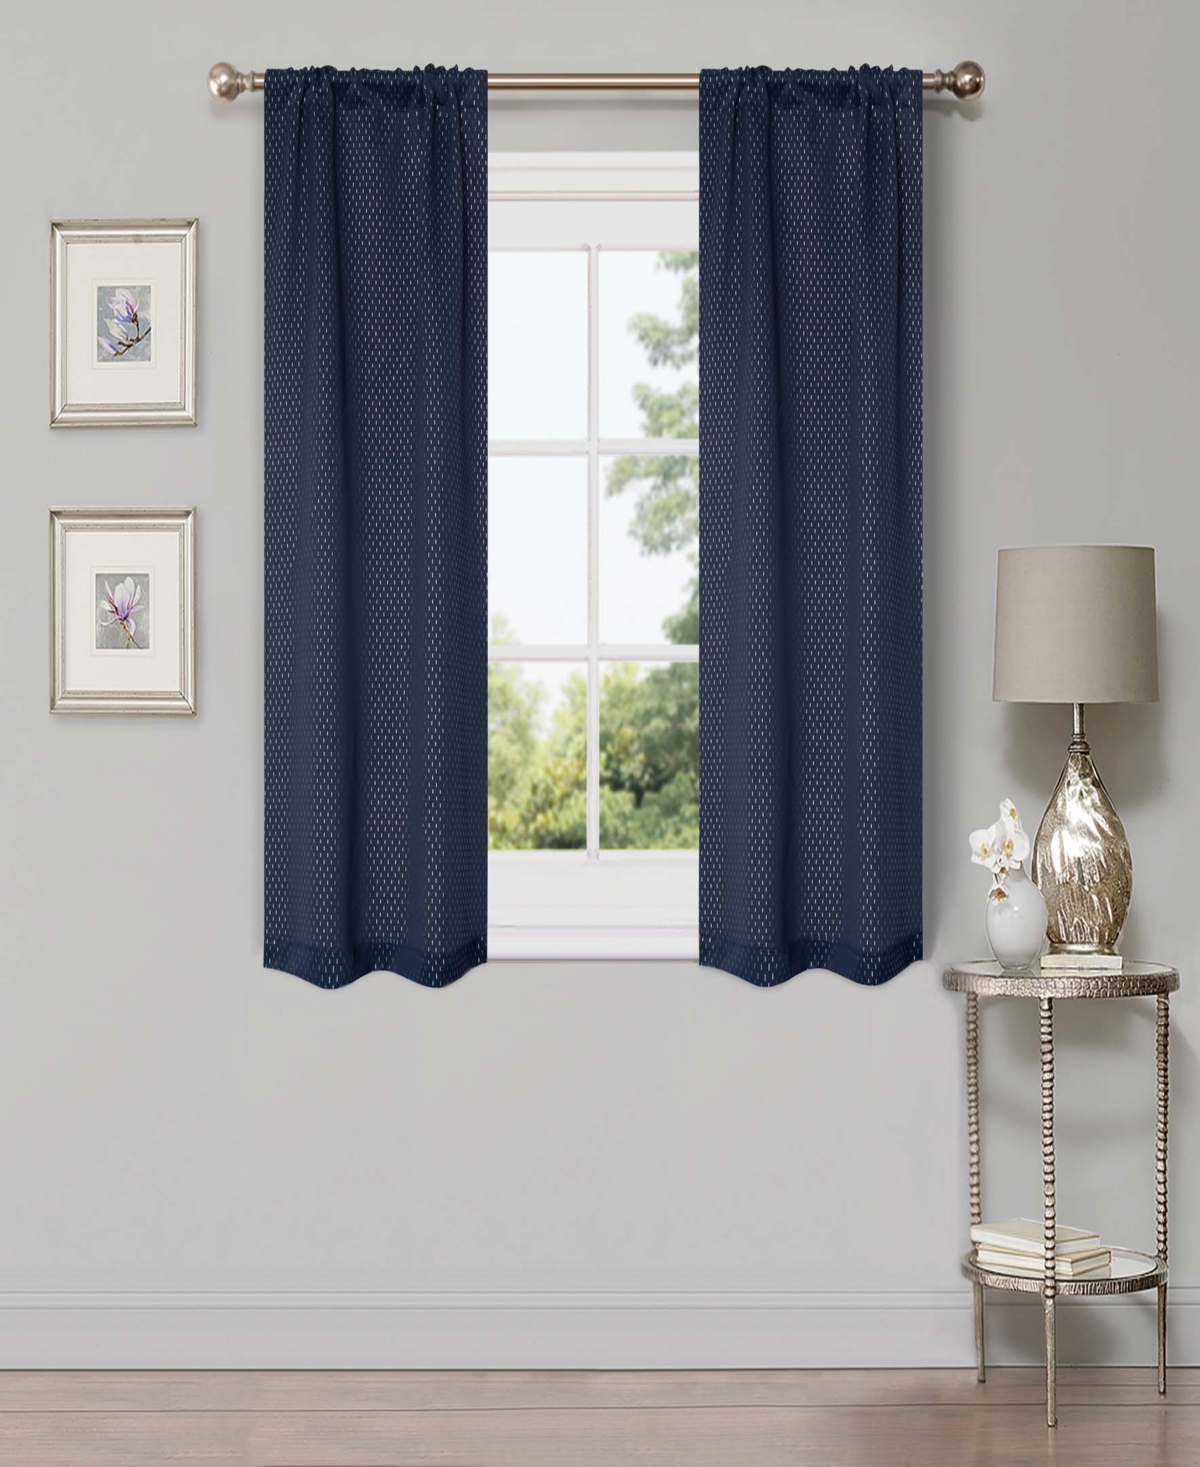 Shimmer Abstract Room Darkening Modern Blackout Wrinkle Resistant 2-Piece Curtain Set with Rod Pocket, 26" X 63" - Navy blue